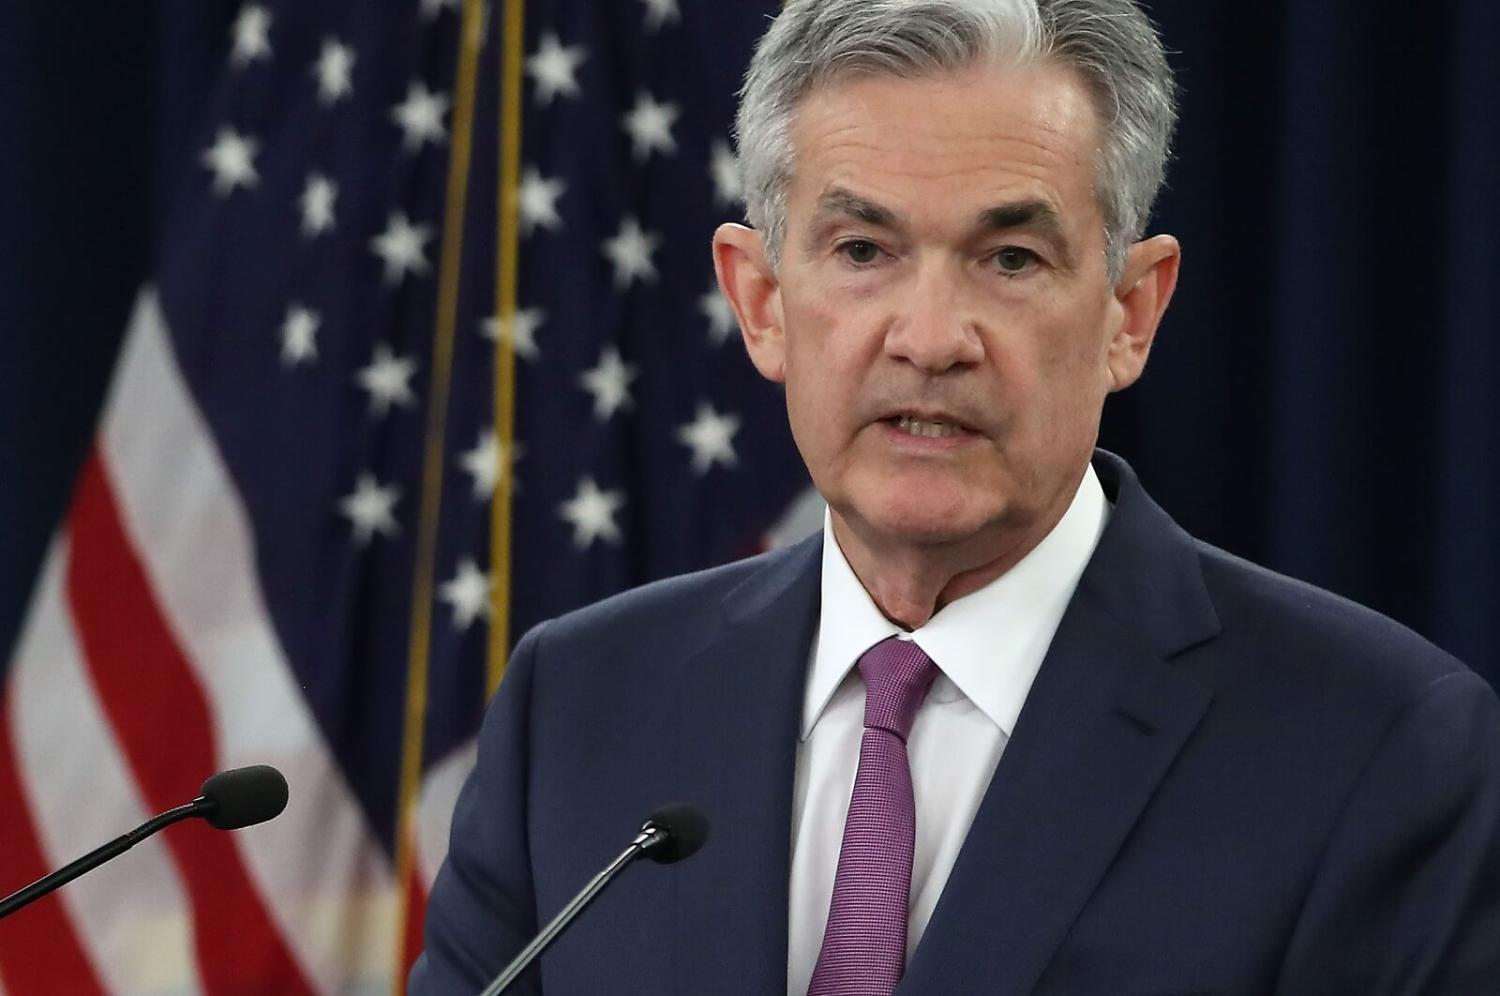 Federal Reserve Chairman Jerome Powell speaks at a news conference, 13 June 2018 (Photo: Mark Wilson/Getty)